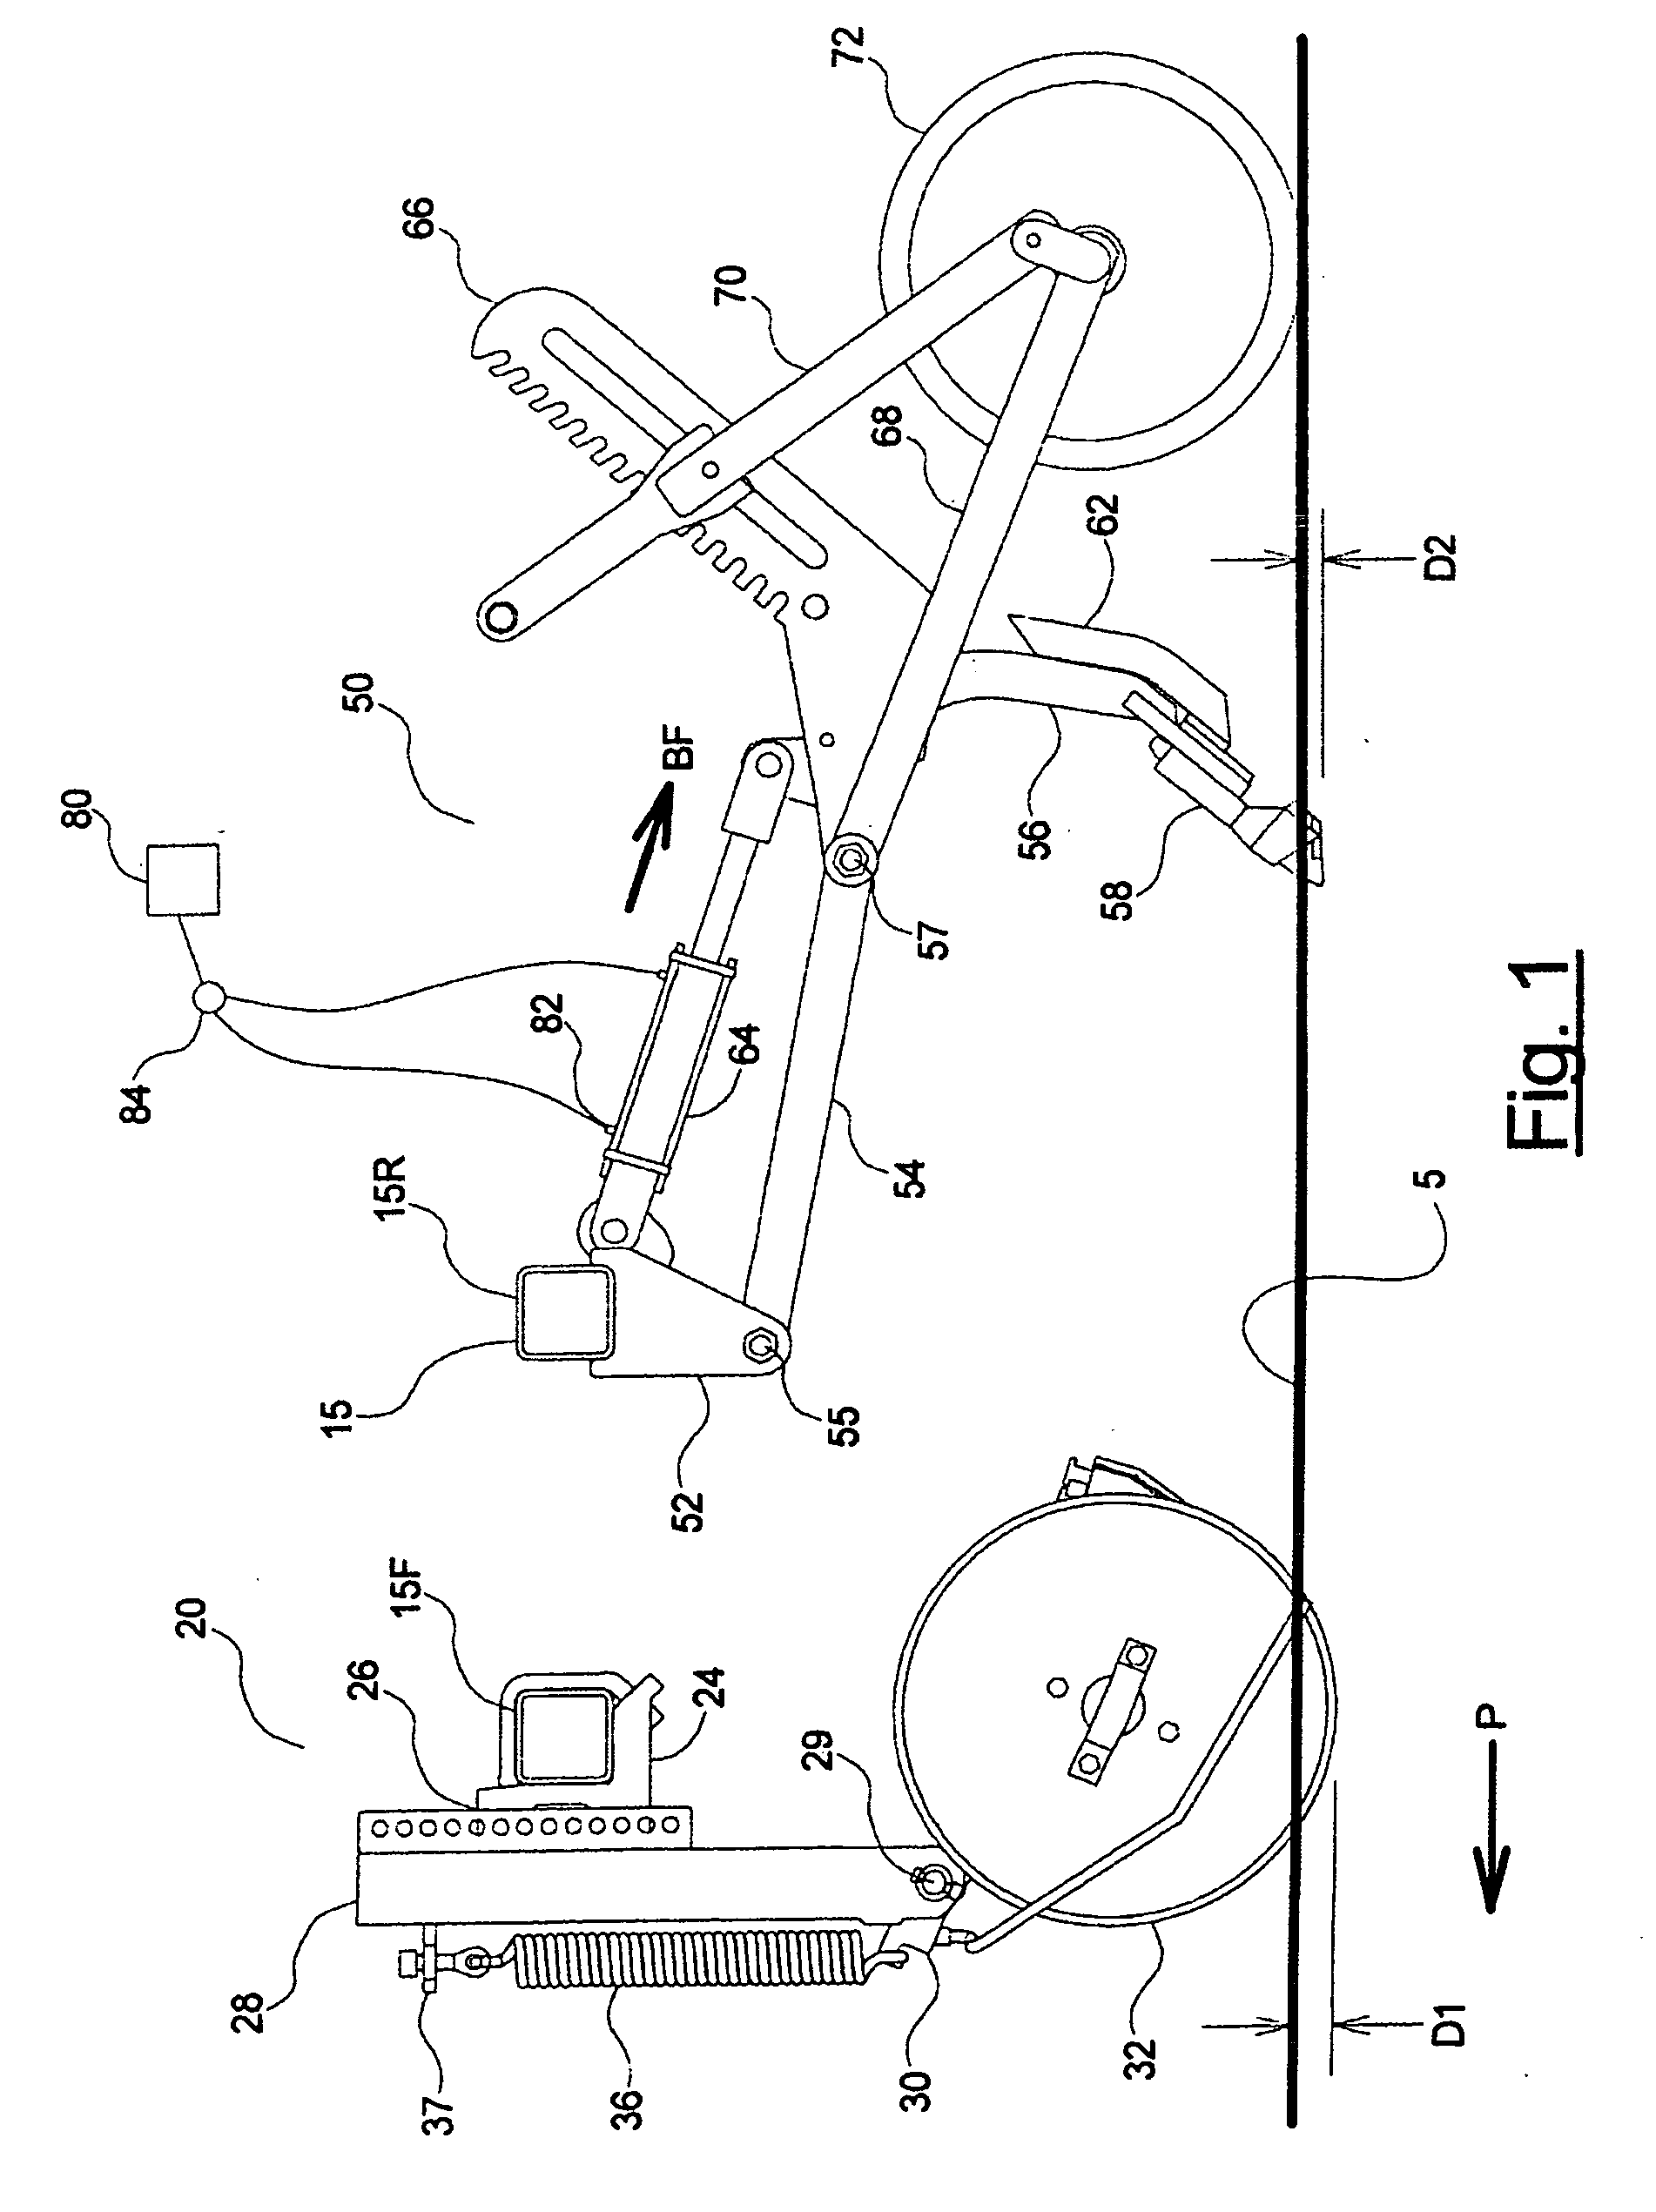 Method and apparatus of agricultural field seeding